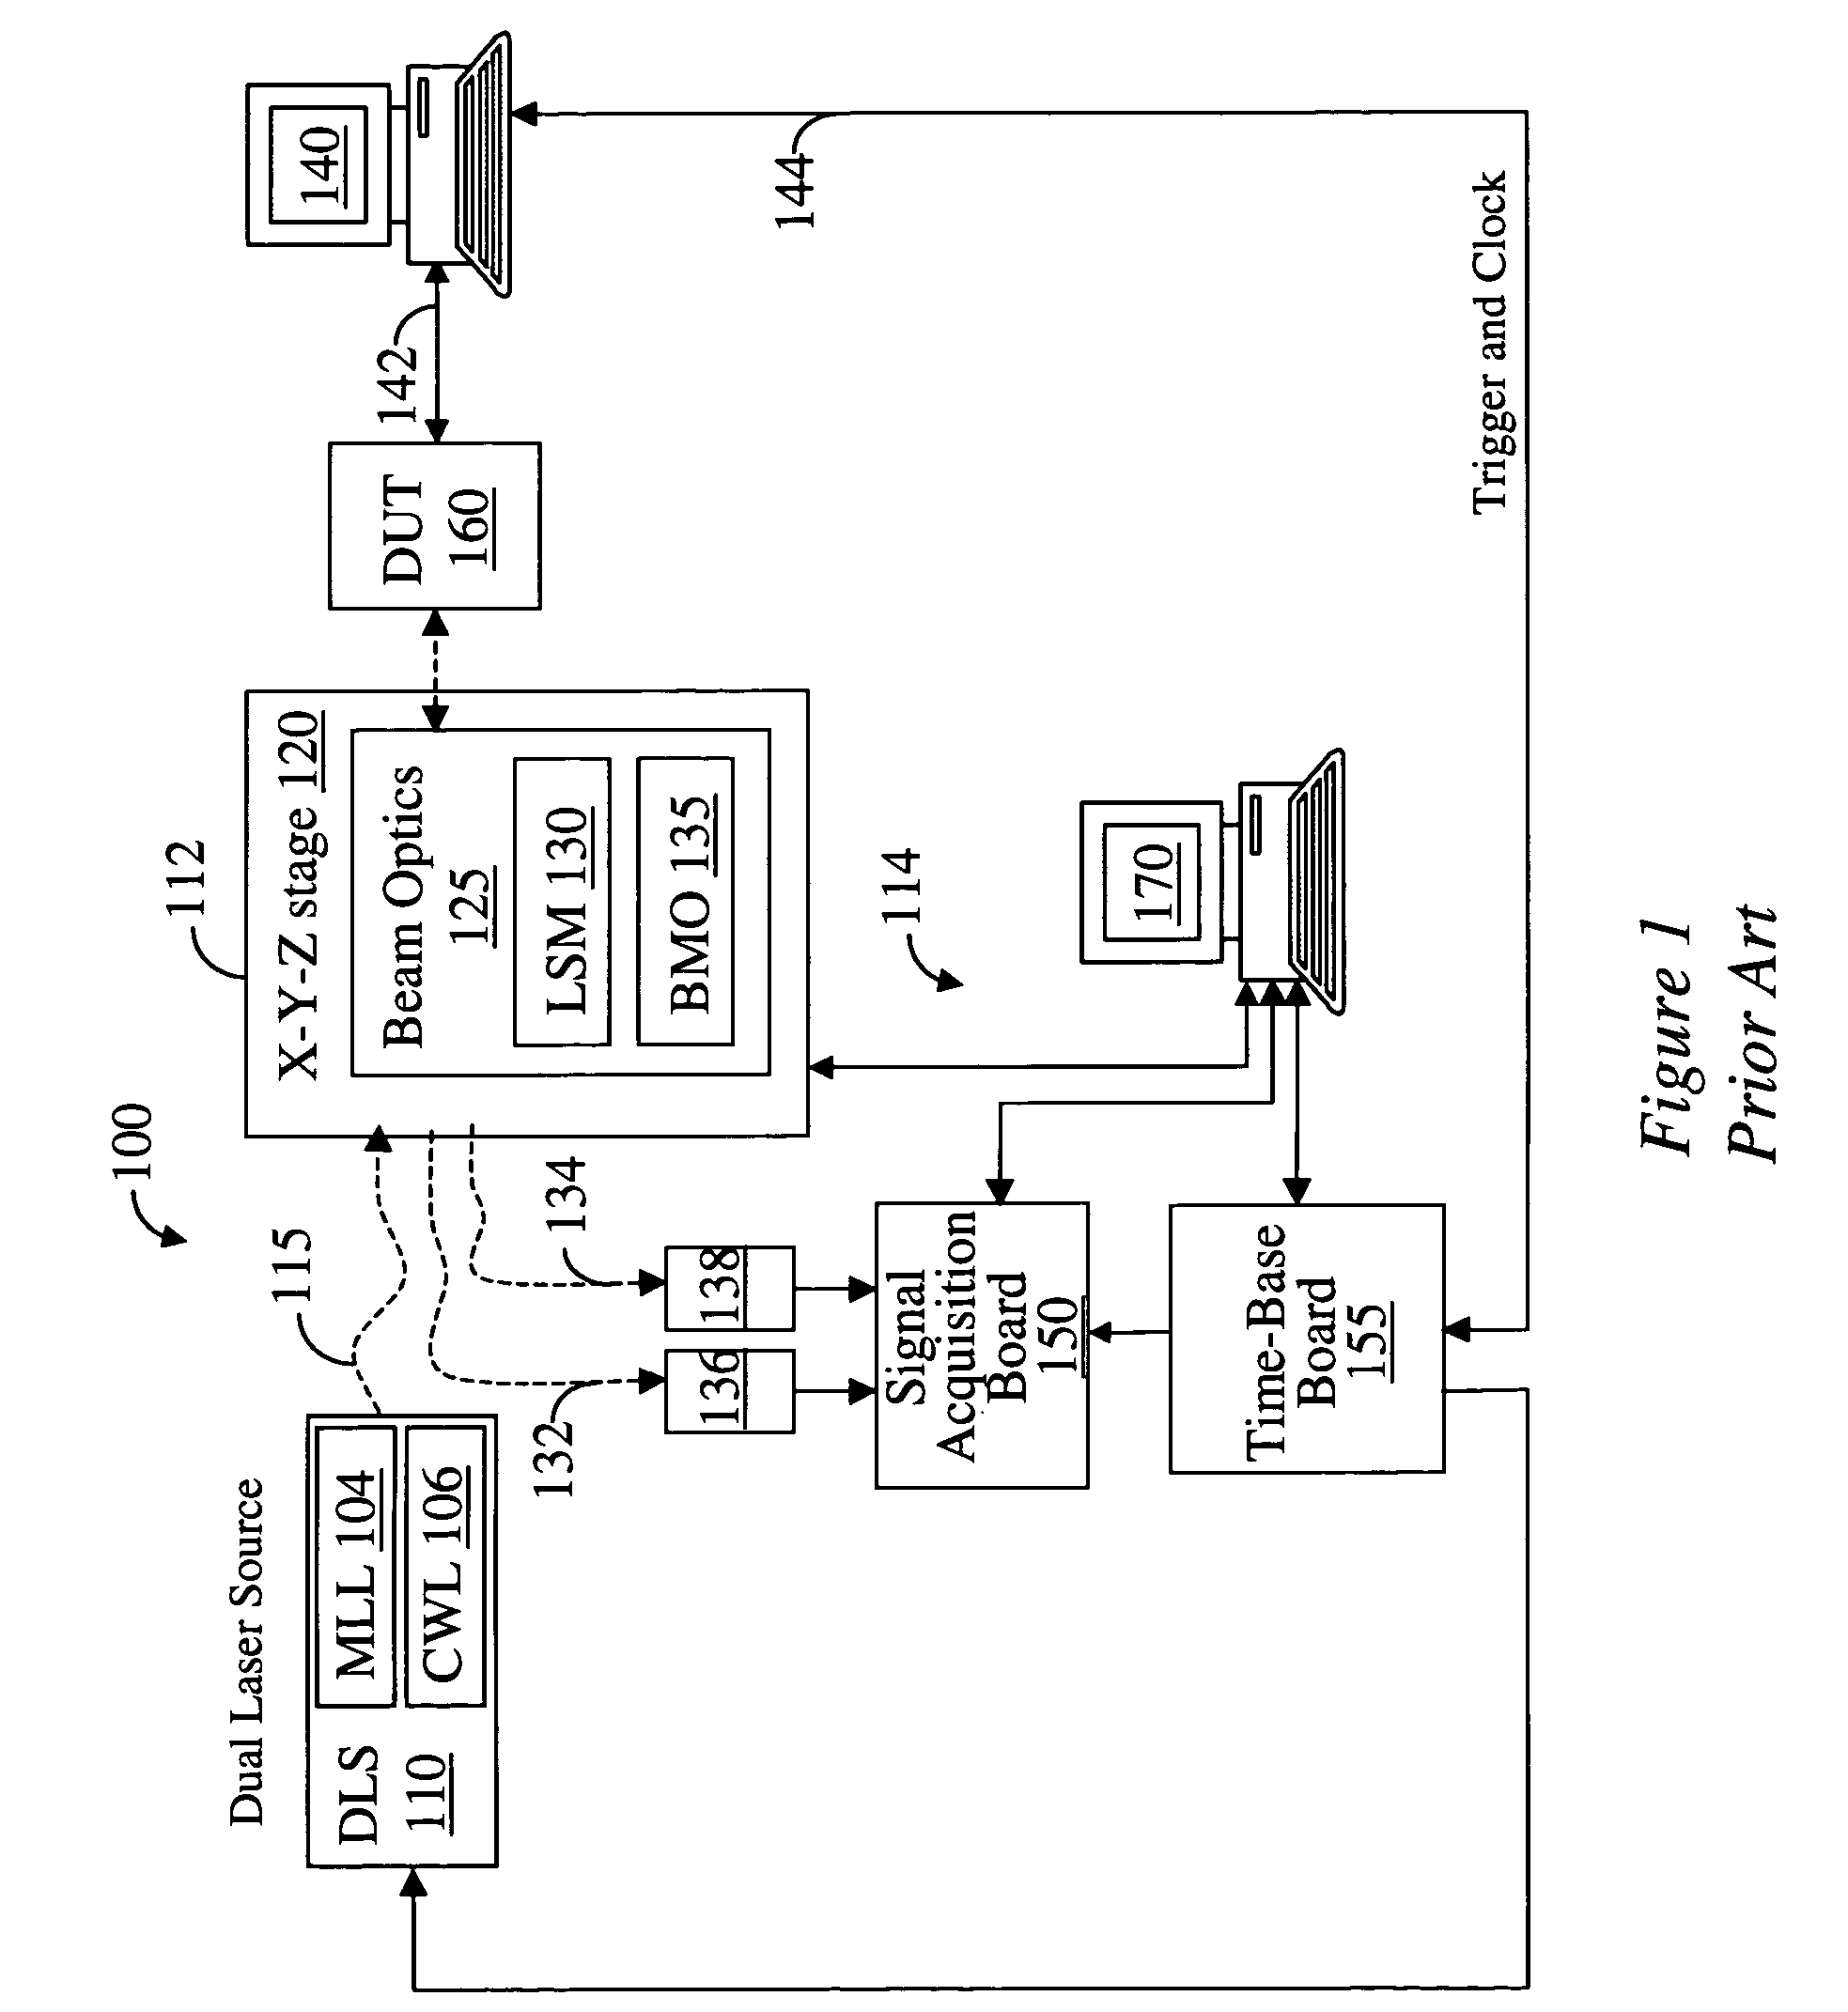 Apparatus and method for probing integrated circuits using polarization difference probing